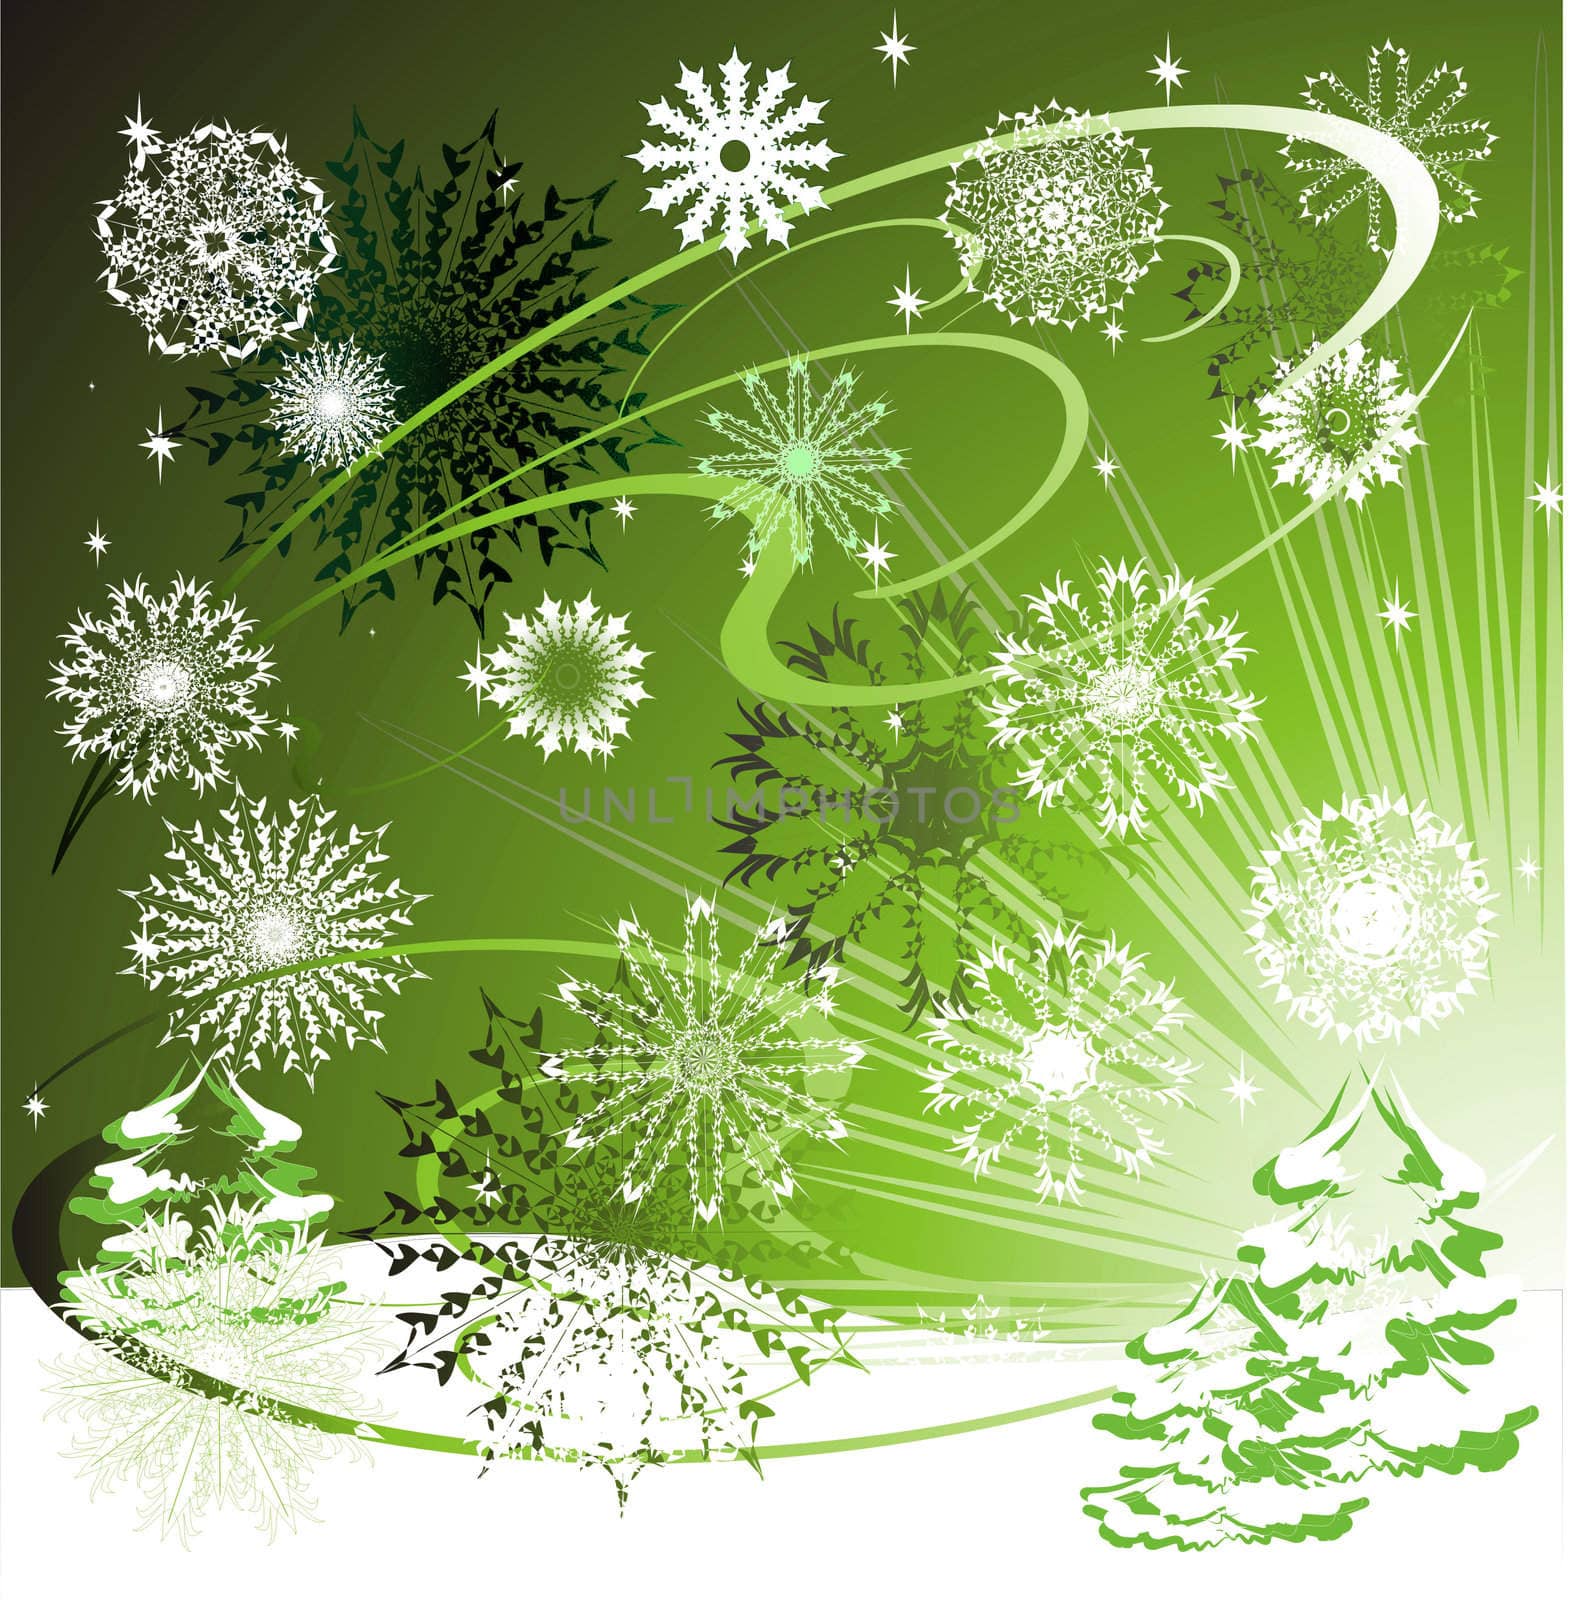 New Year's or Christmas card with a Christmas tree and snowflakes